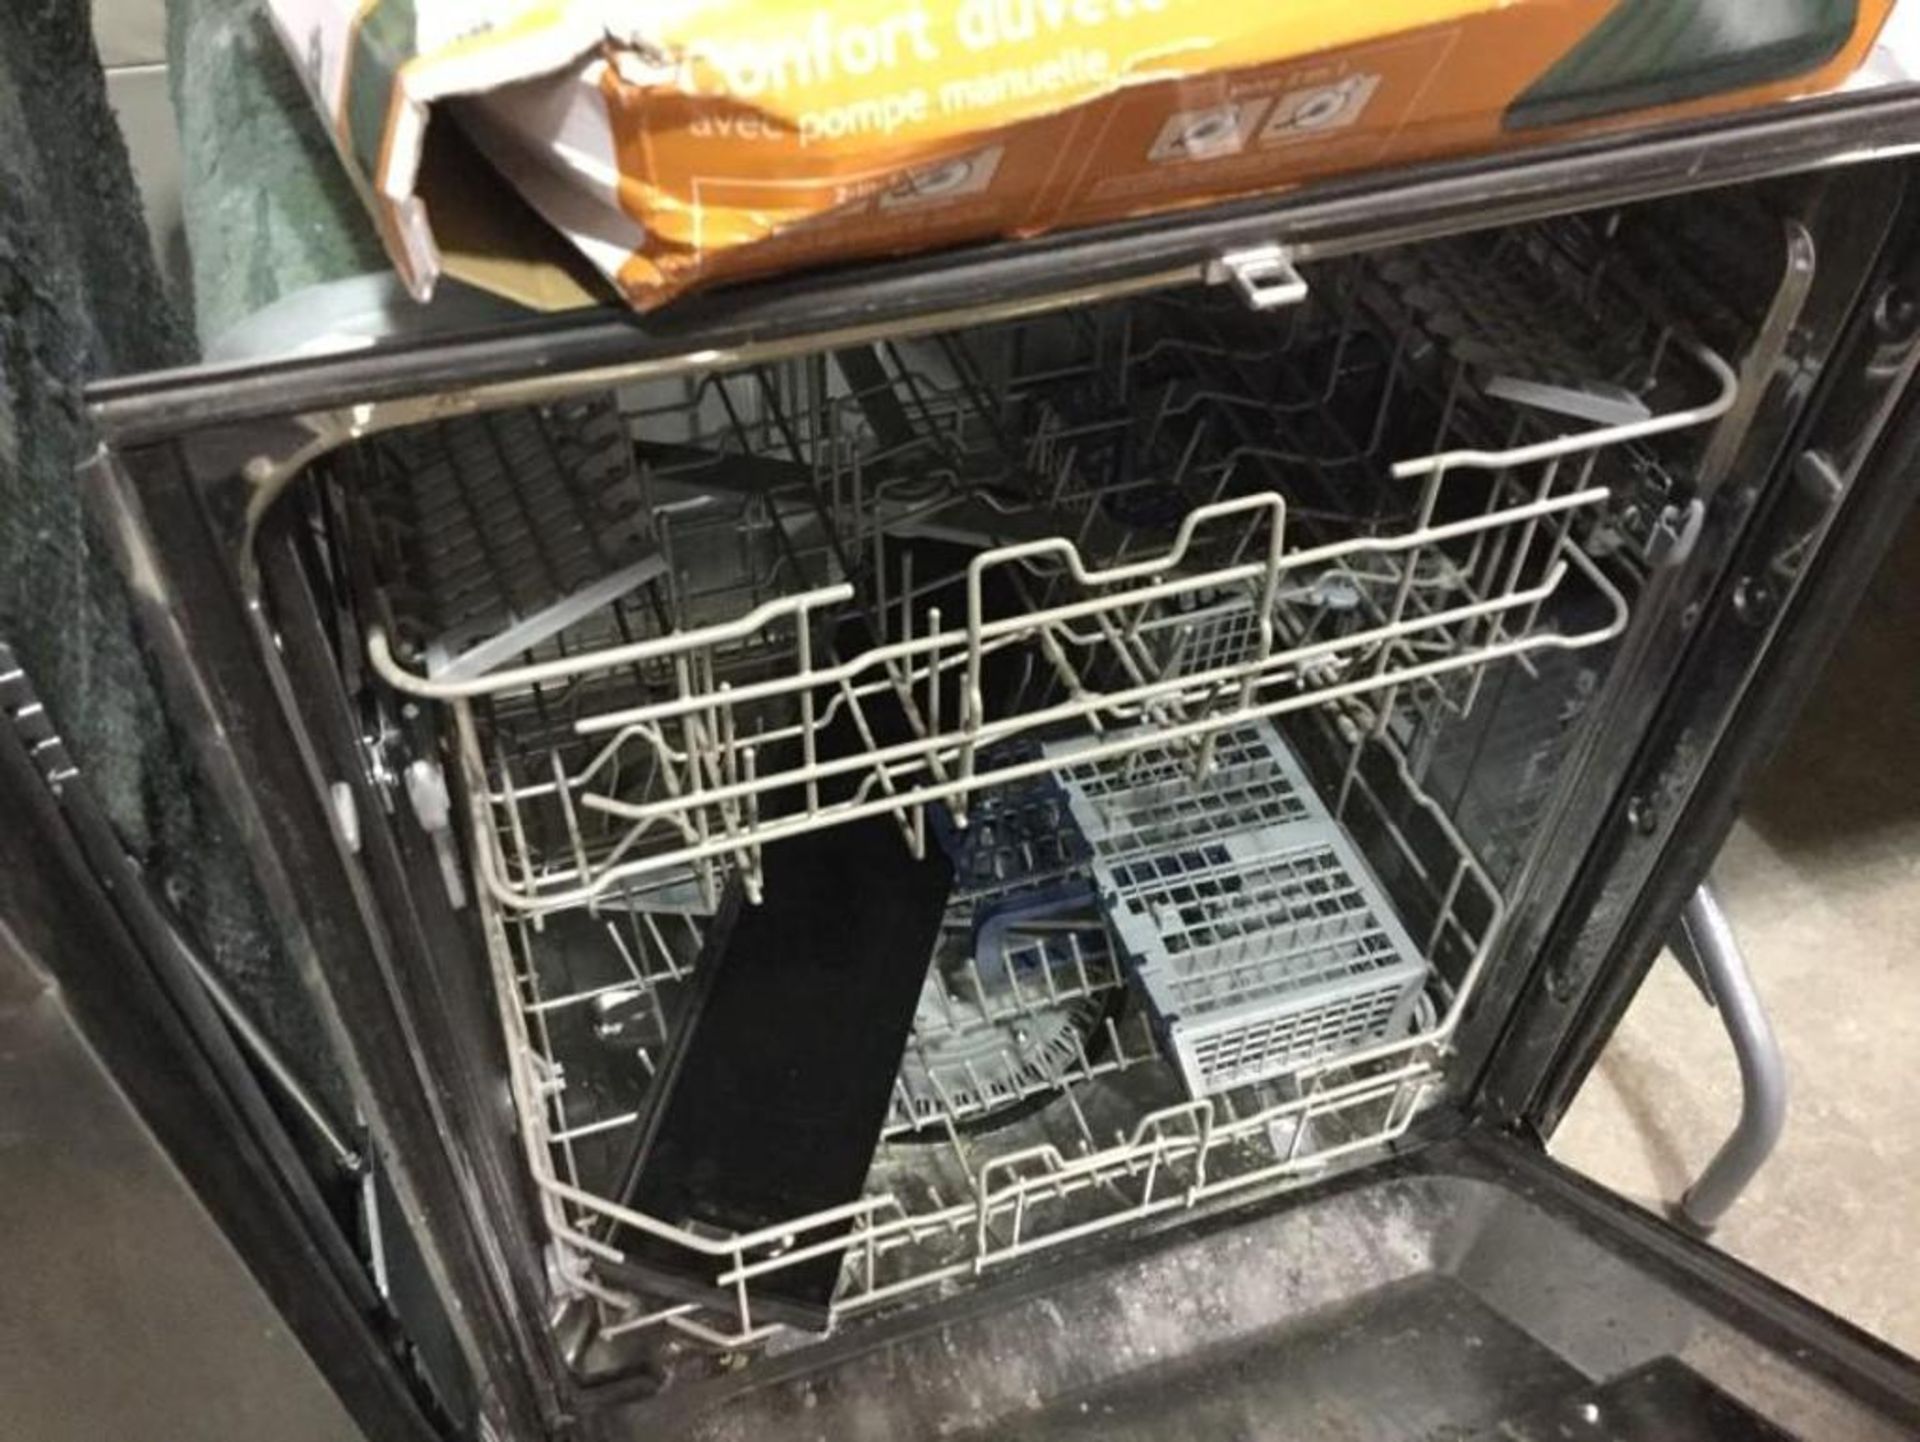 Samsung Stainless Steel Dishwasher - Image 2 of 2